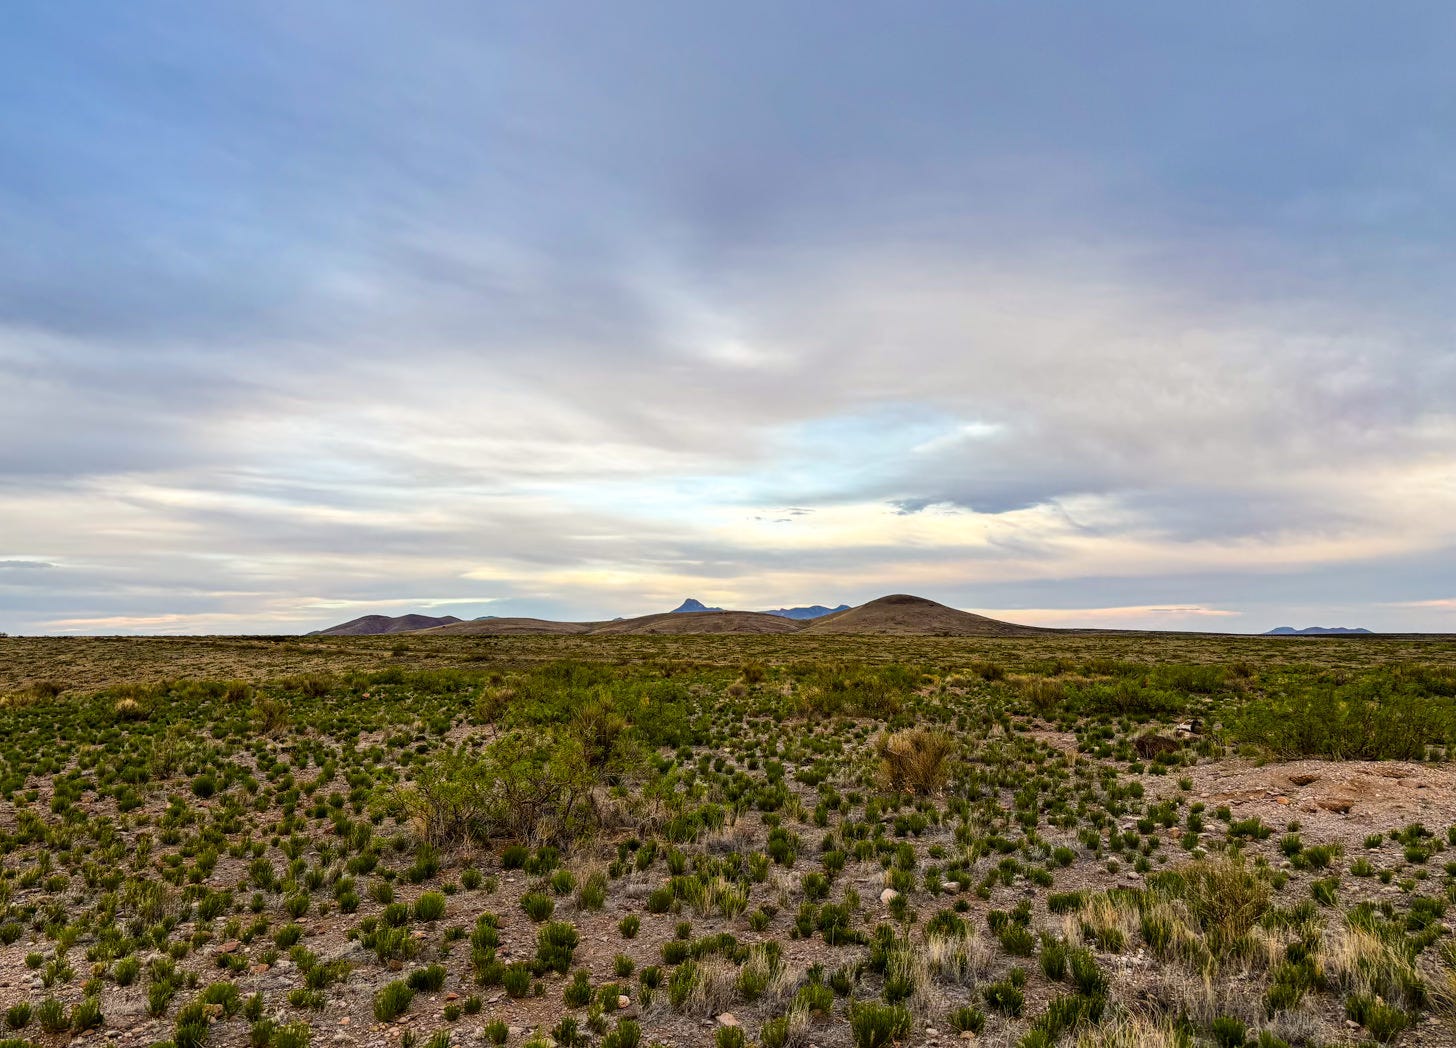 desert landscape with low bushes and brown mountains in distance